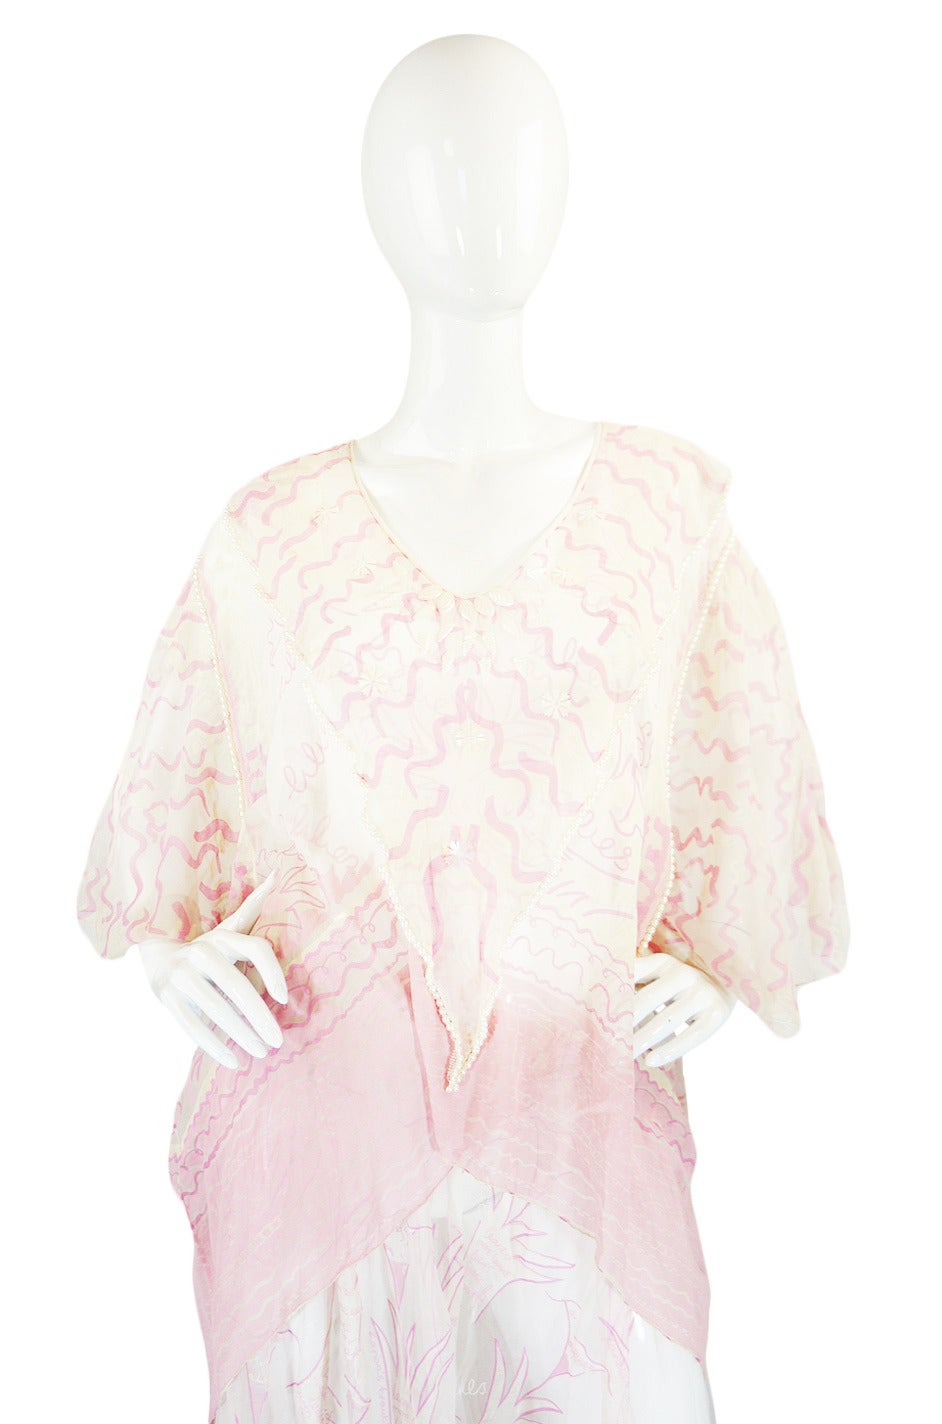 This two piece ensemble by Zandra Rhodes in not only rare, but is also quite beautiful. It is constructed from a fine white silk chiffon that is entirely hand painted with Zandra's famous 